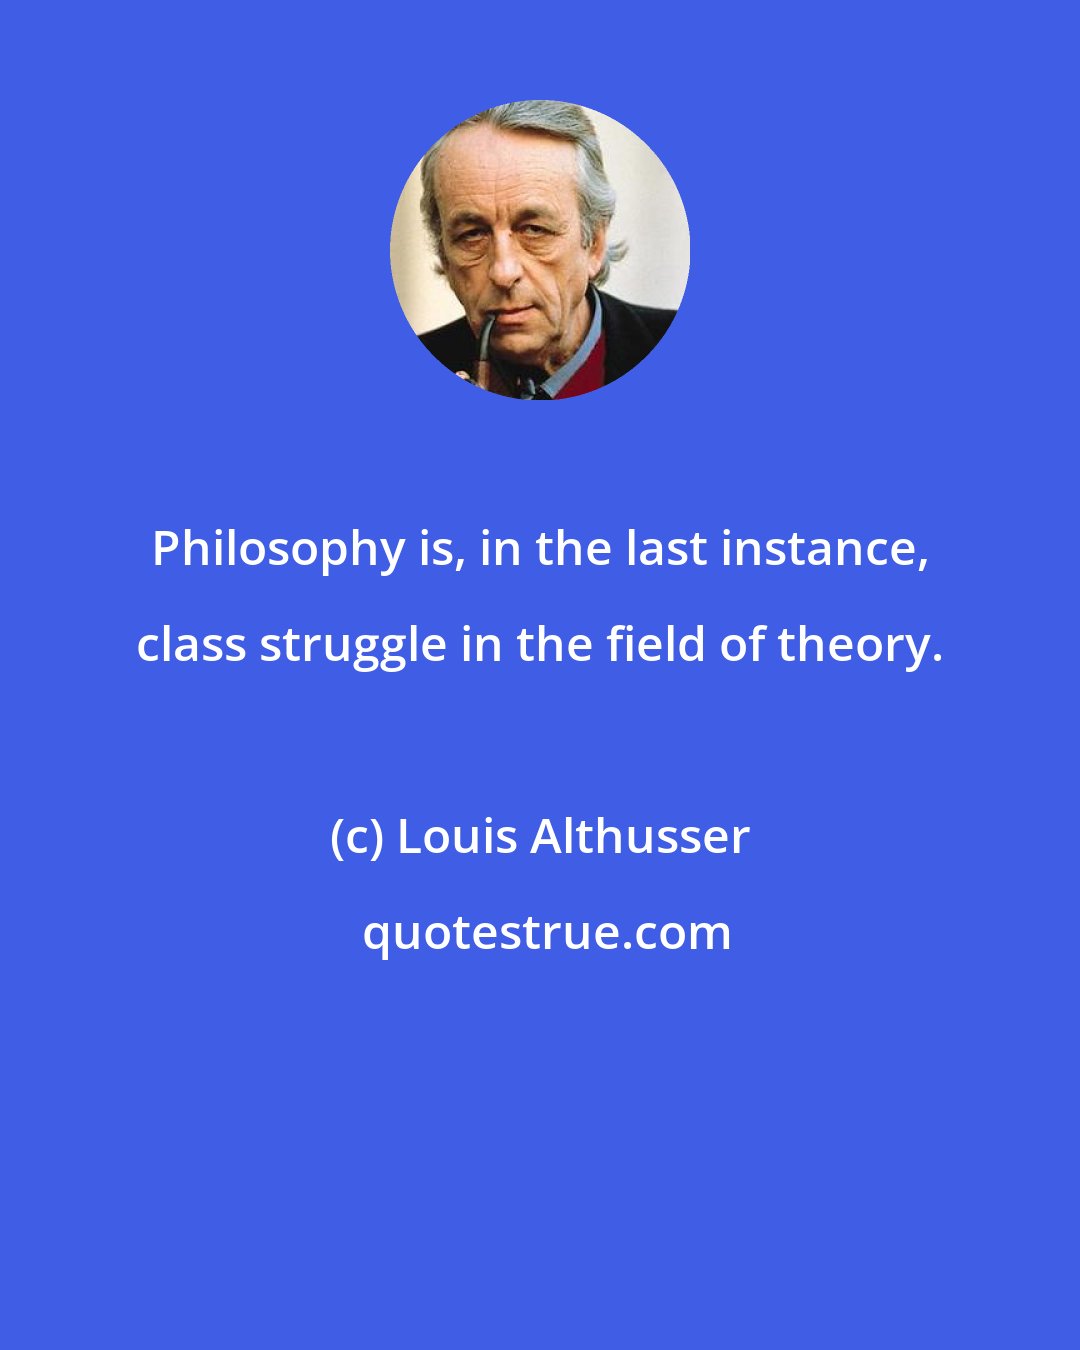 Louis Althusser: Philosophy is, in the last instance, class struggle in the field of theory.